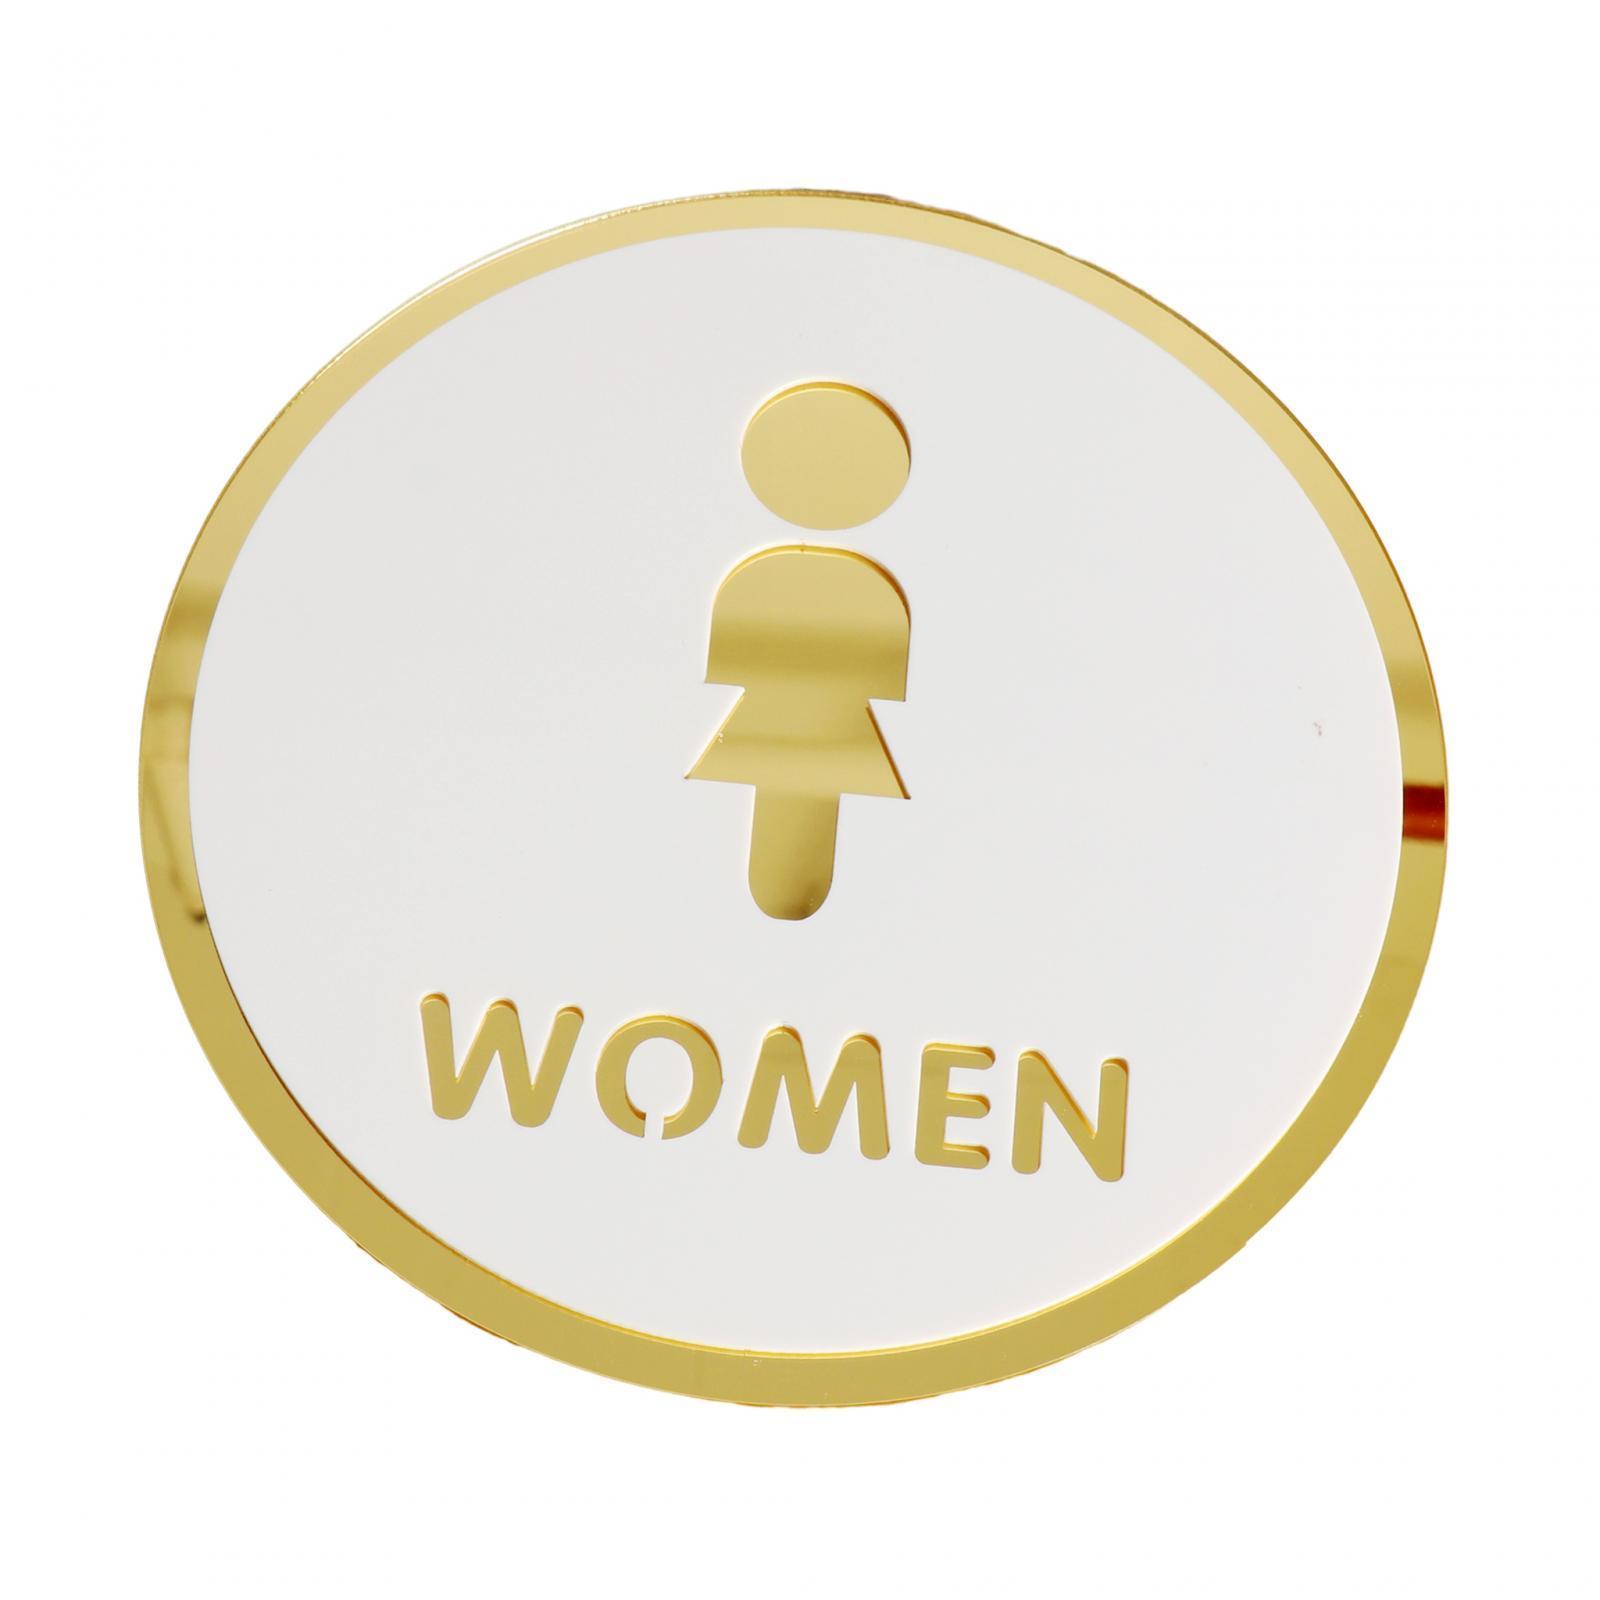 7.8inch Toilet Sign Acrylic Restroom Identification Sign for Business Office